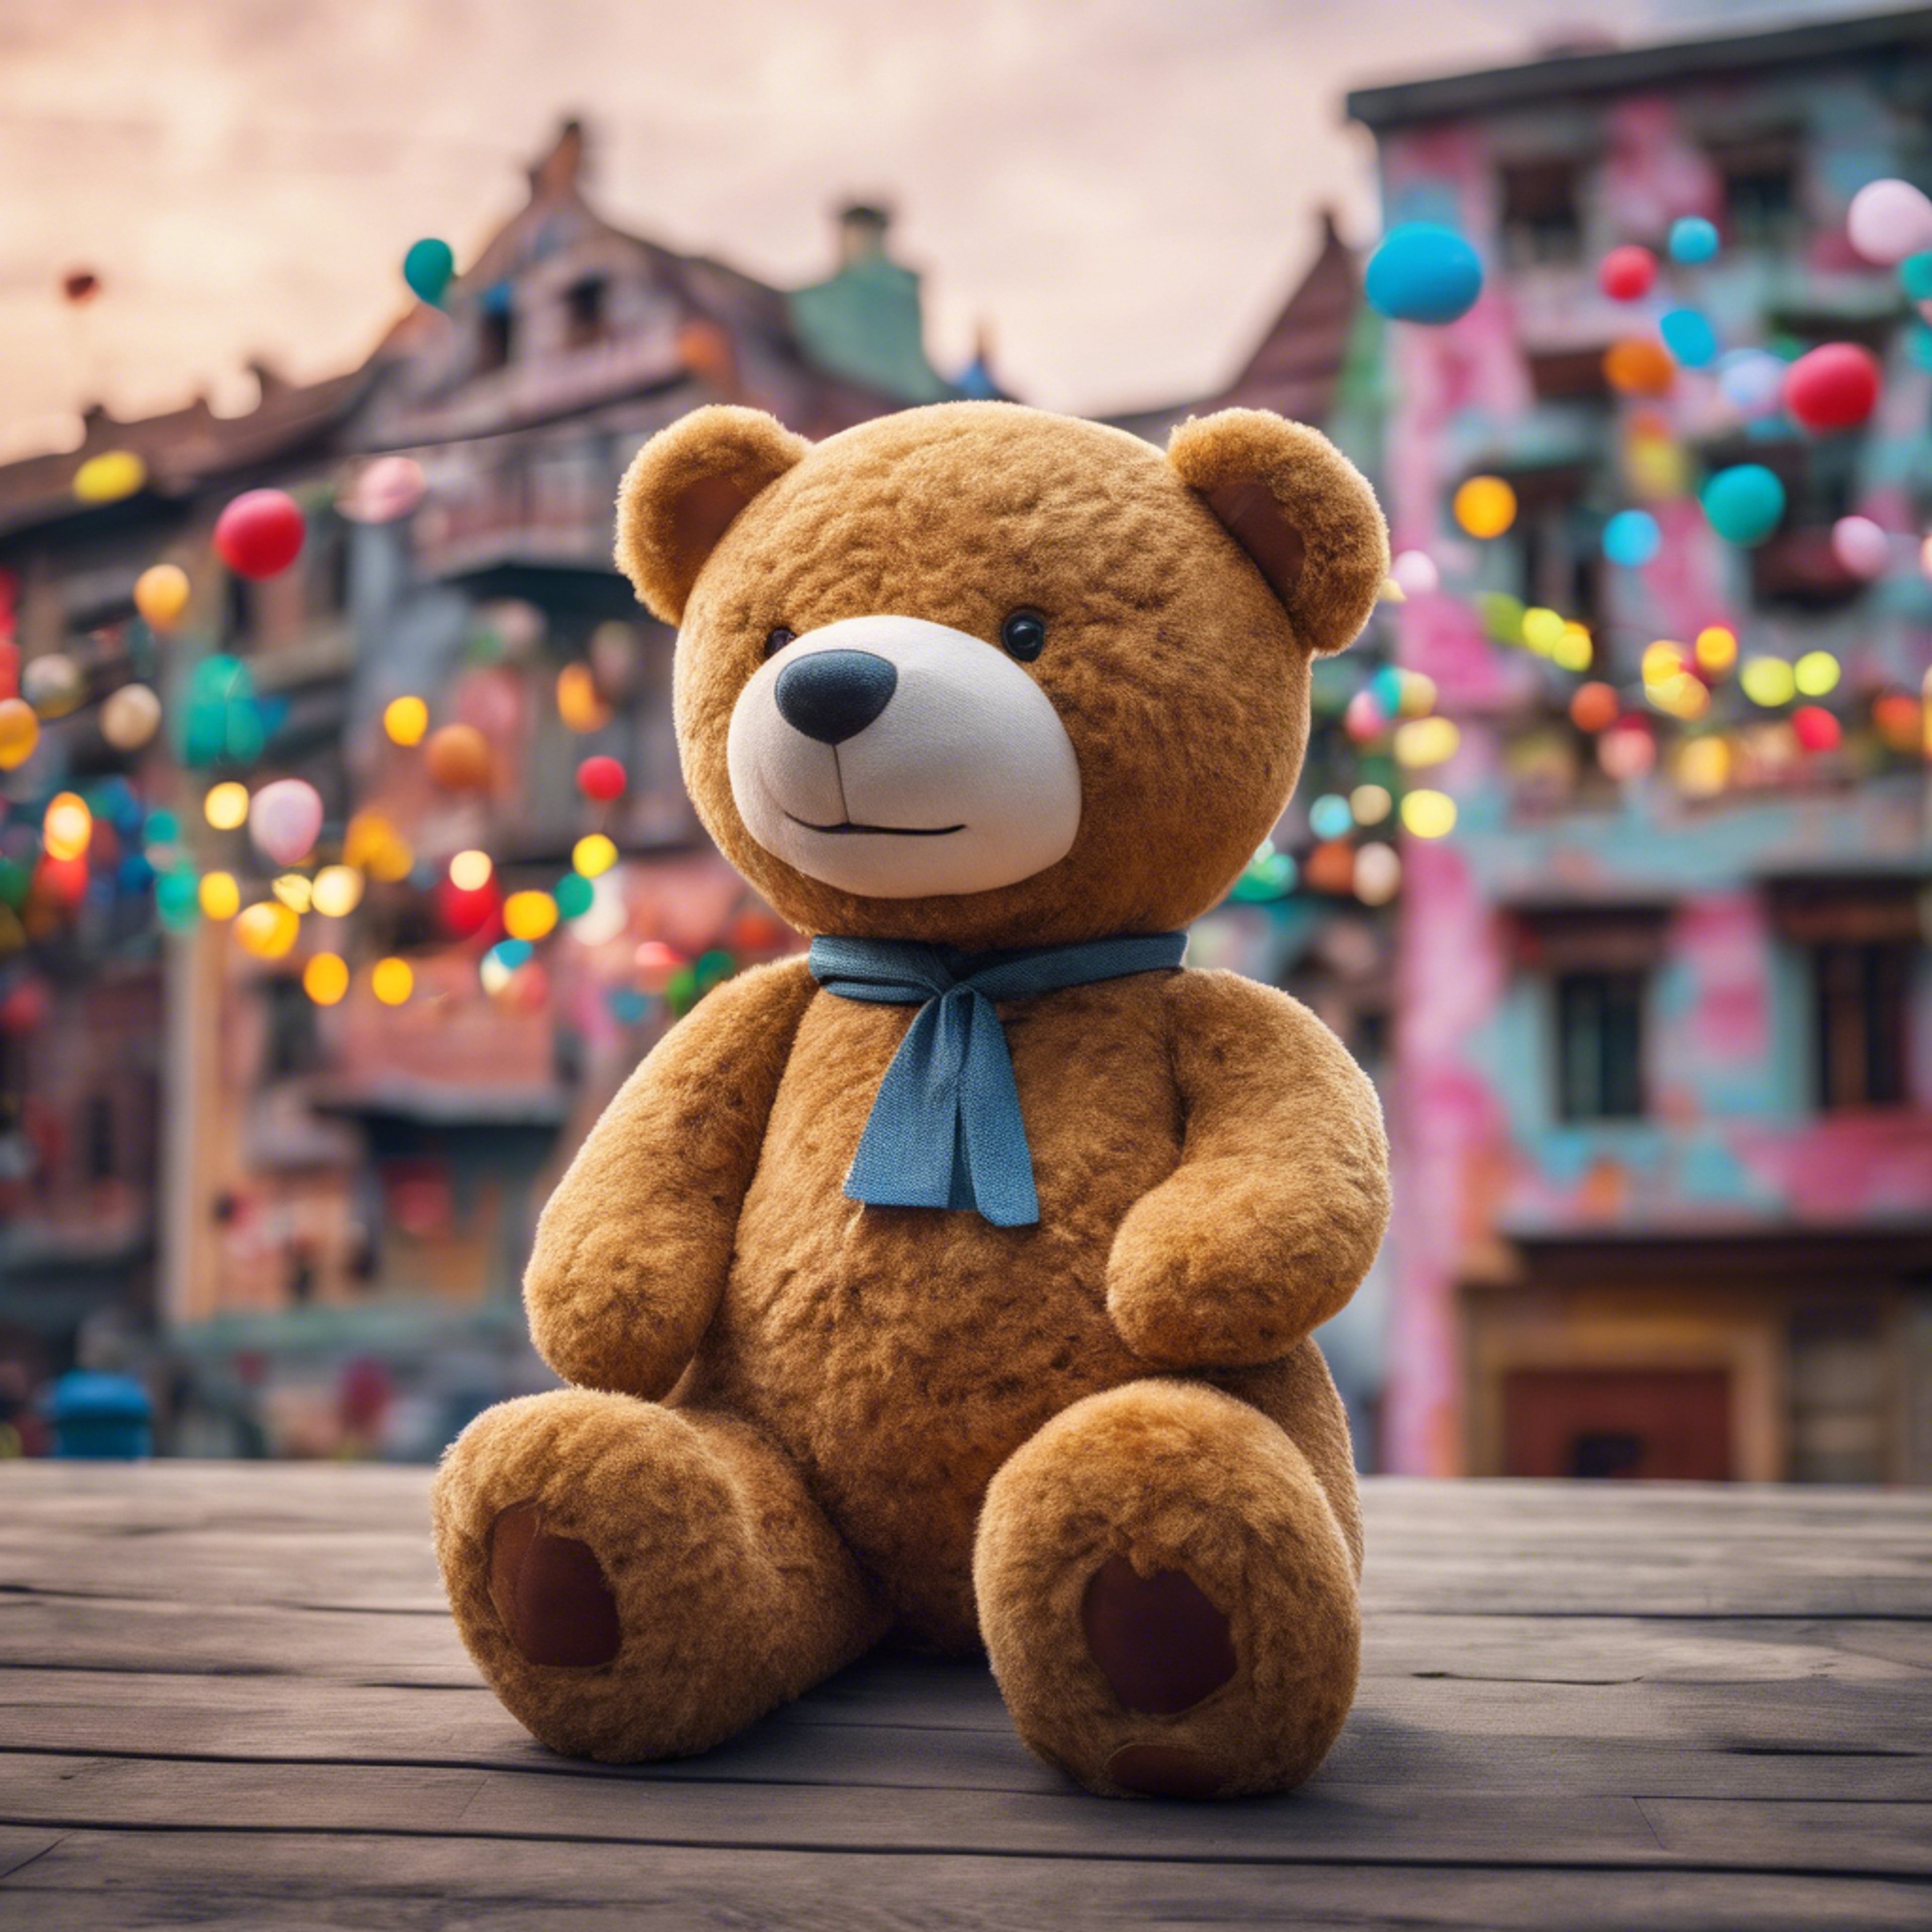 A giant teddy bear watching over a playful and colorful dream town. Hintergrund[2720b550e885450daa82]